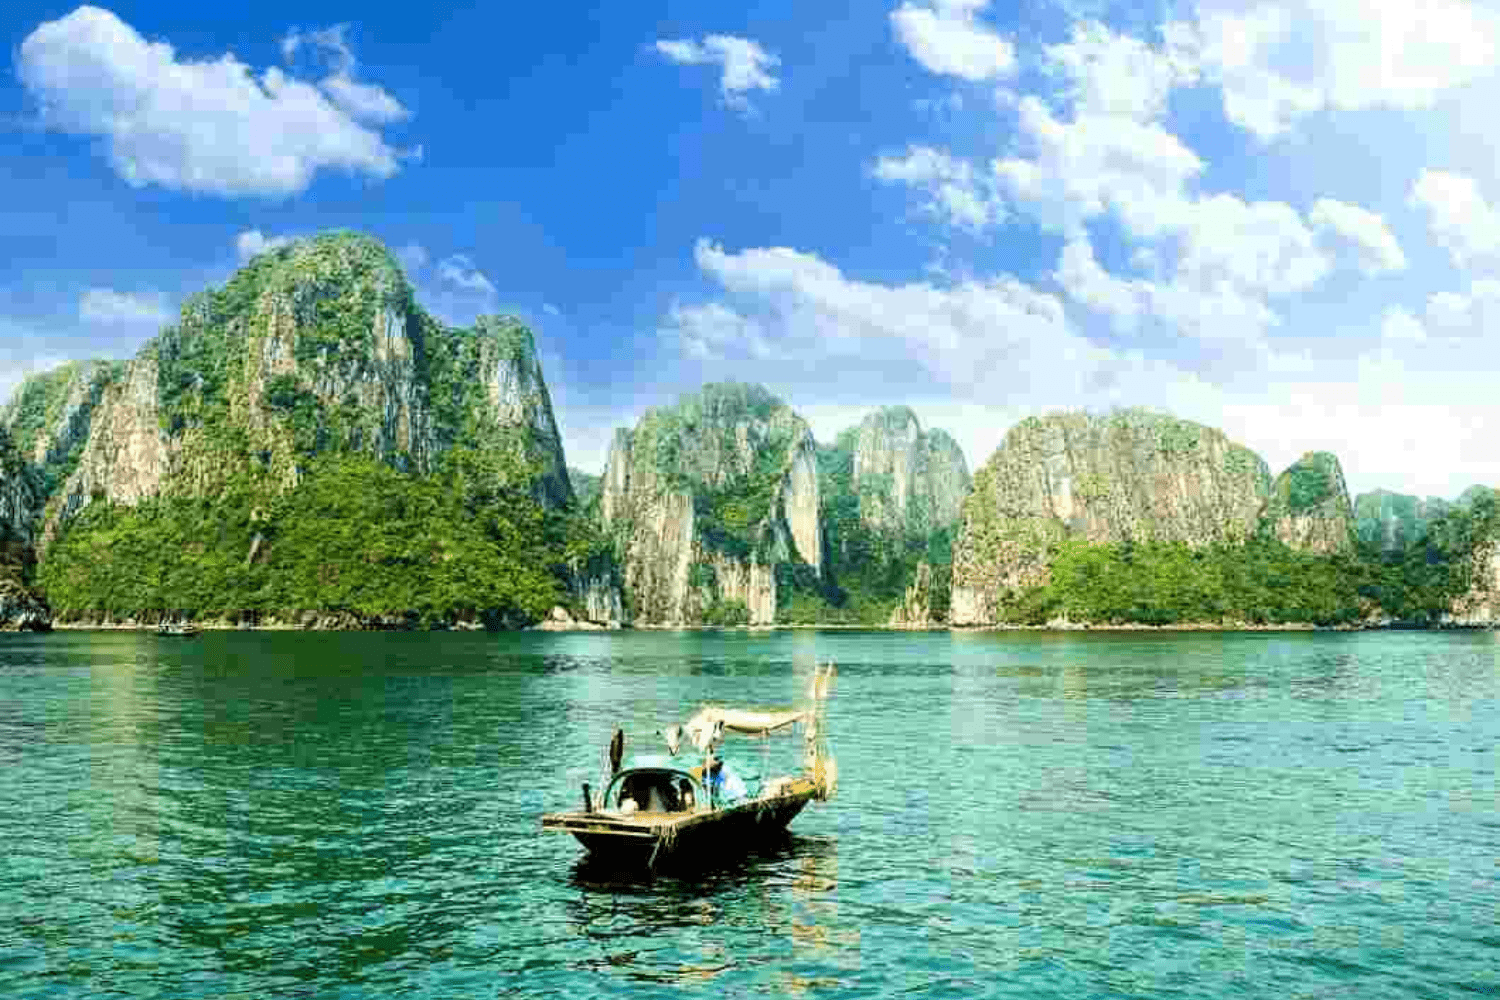 20 Best Places to Visit in Vietnam - Popular Tourist Attractions